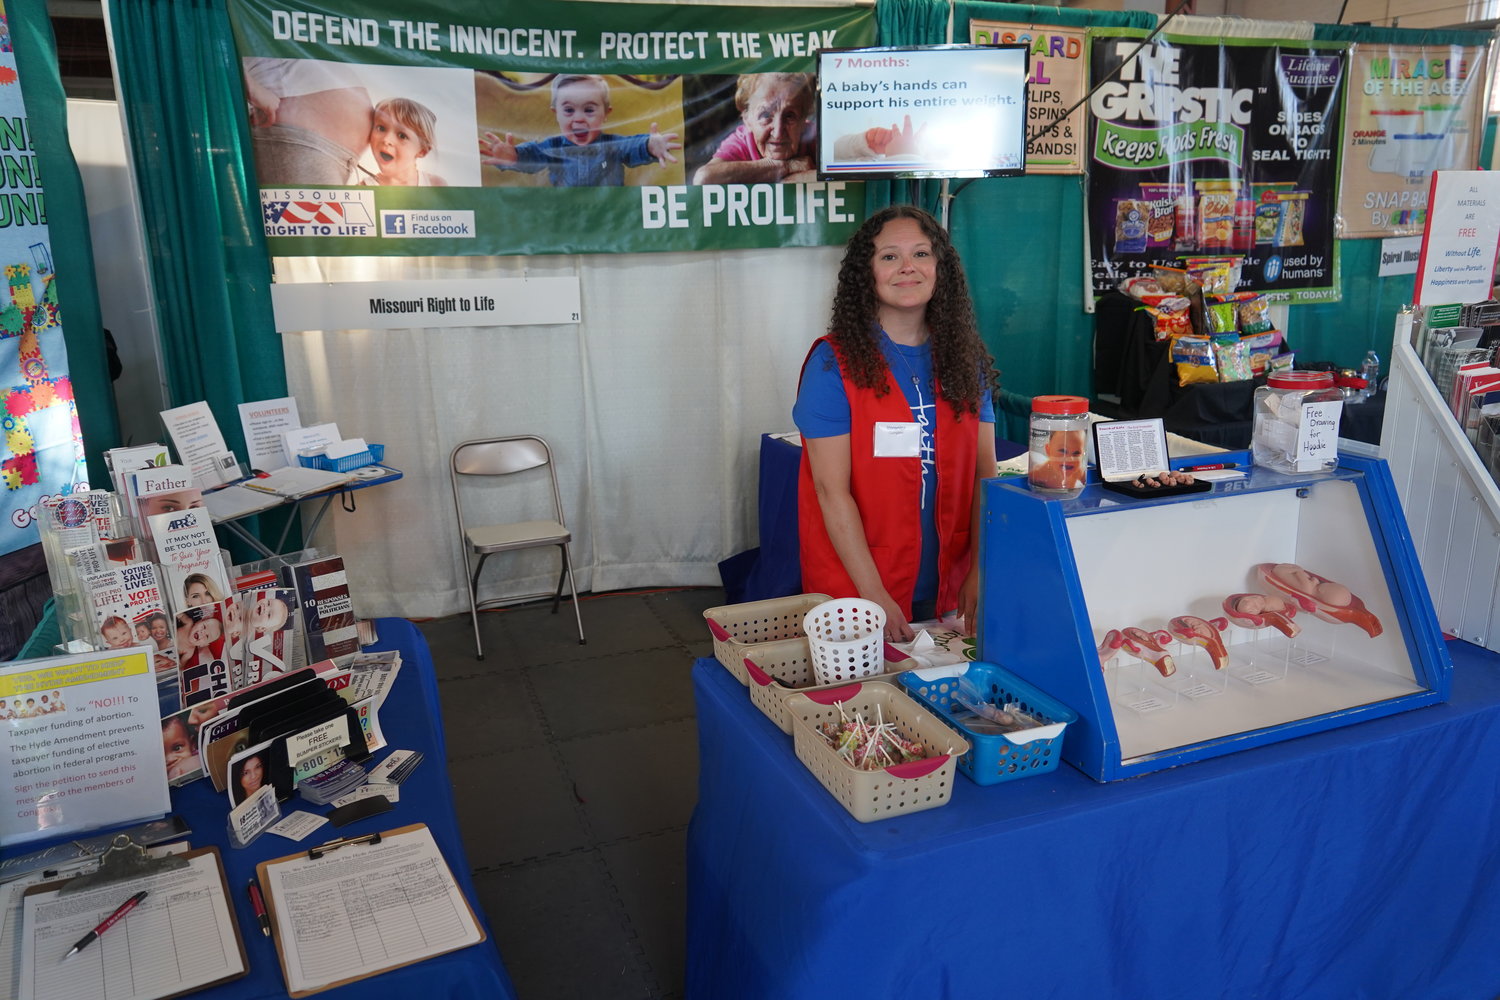 Veronica Cumpton greets visitors to the Right to Life booth at the 2022 Missouri State Fair in Sedalia.